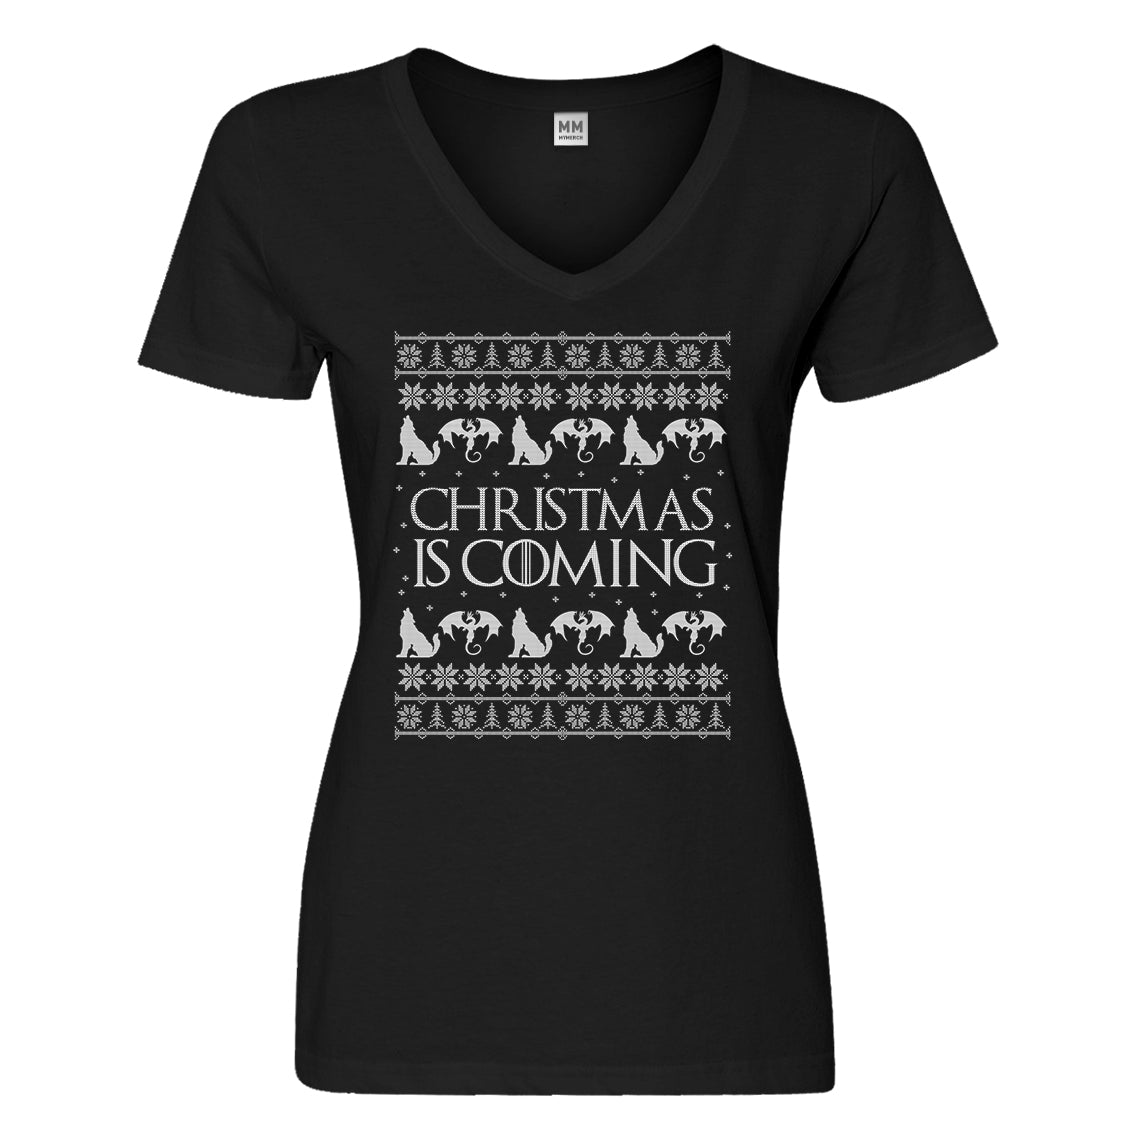 Womens Christmas is Coming Vneck T-shirt